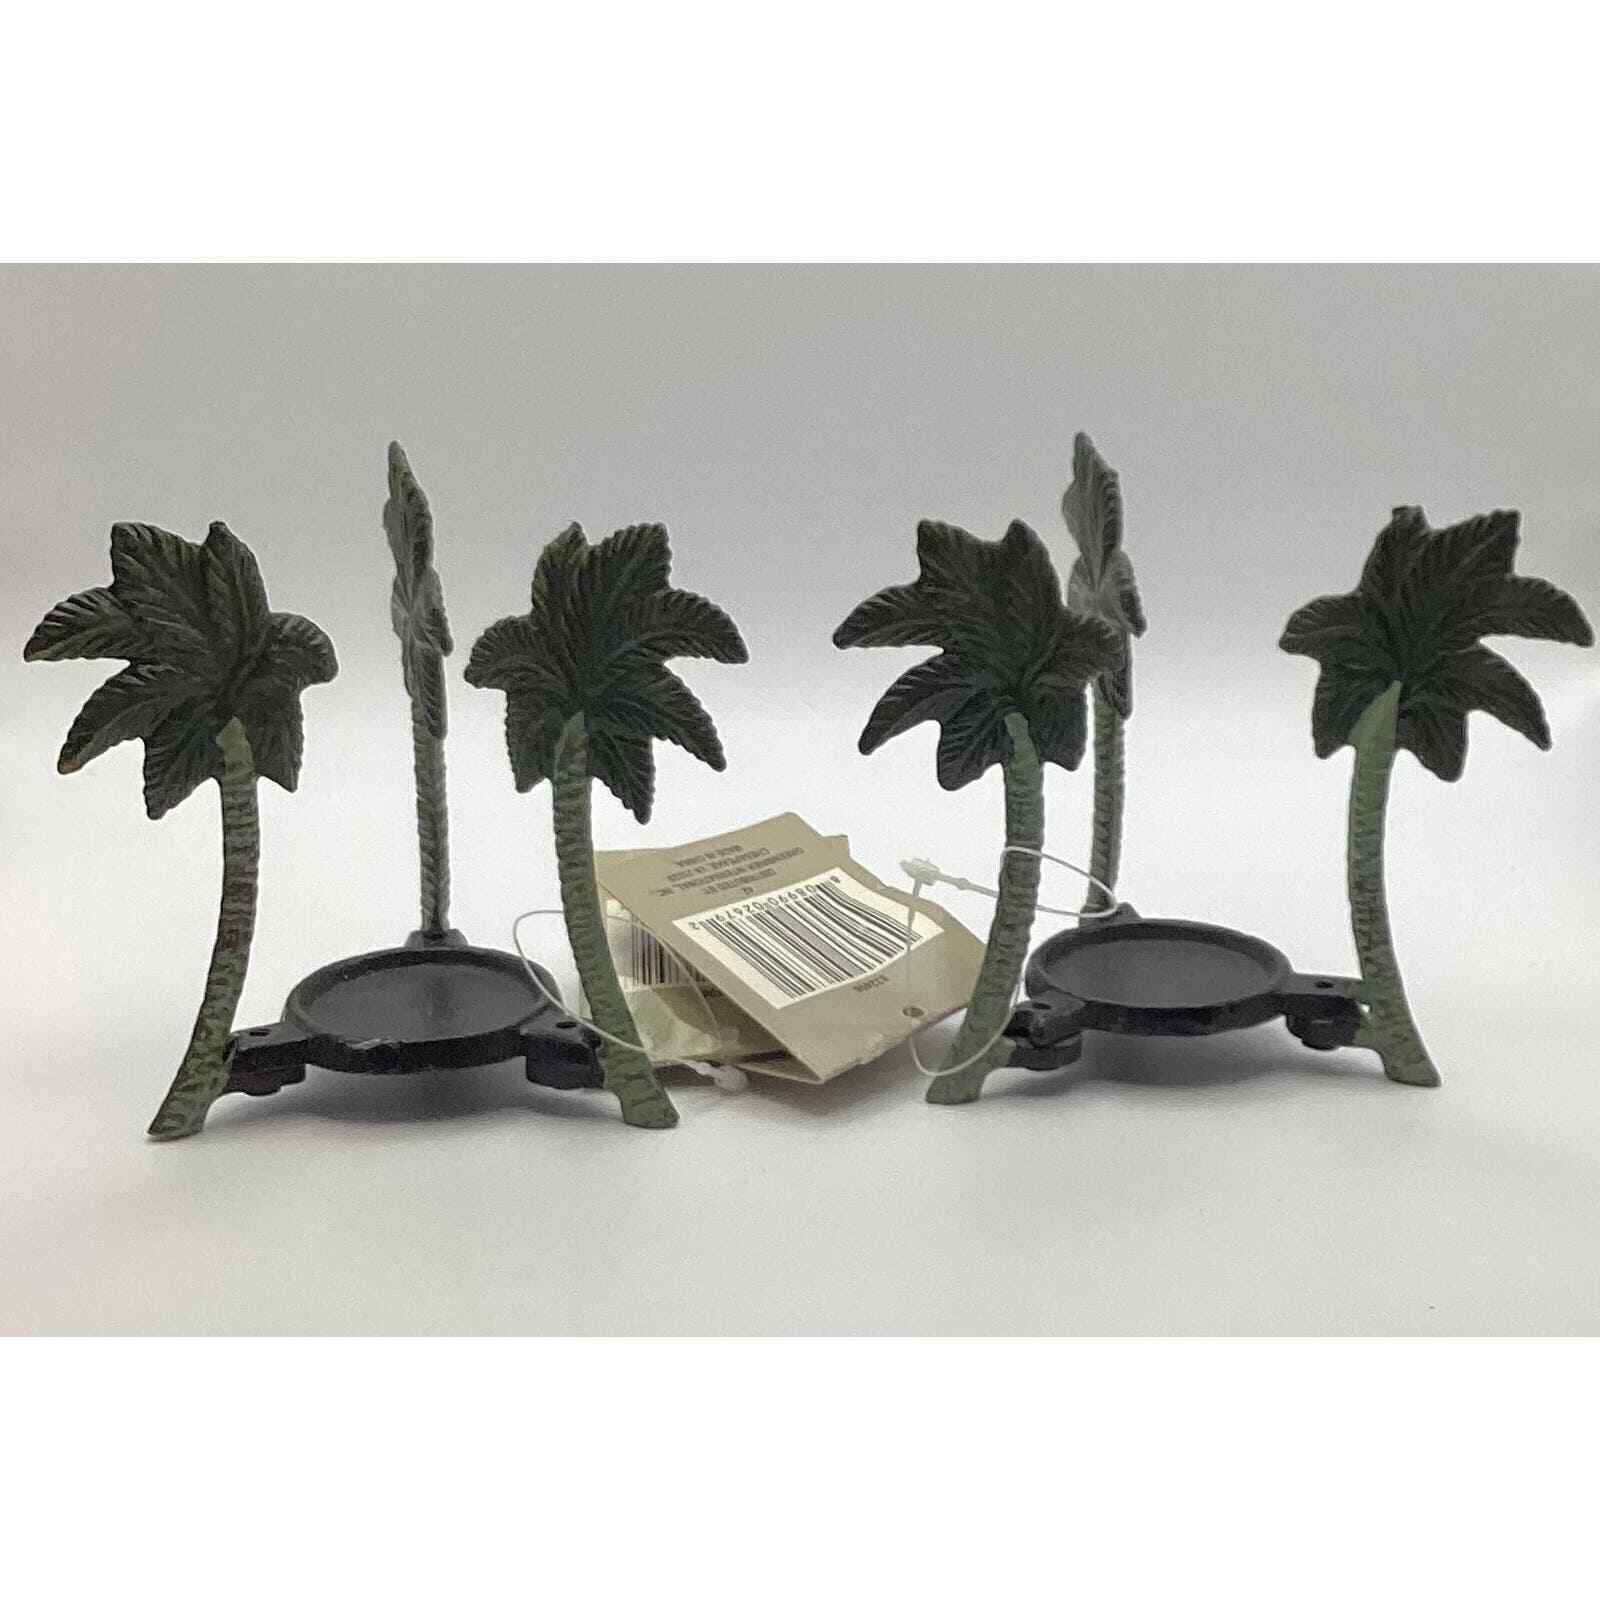 Tradewind Bay Potpourri or Candle Palm Tree Style Cast Iron Stands (2)